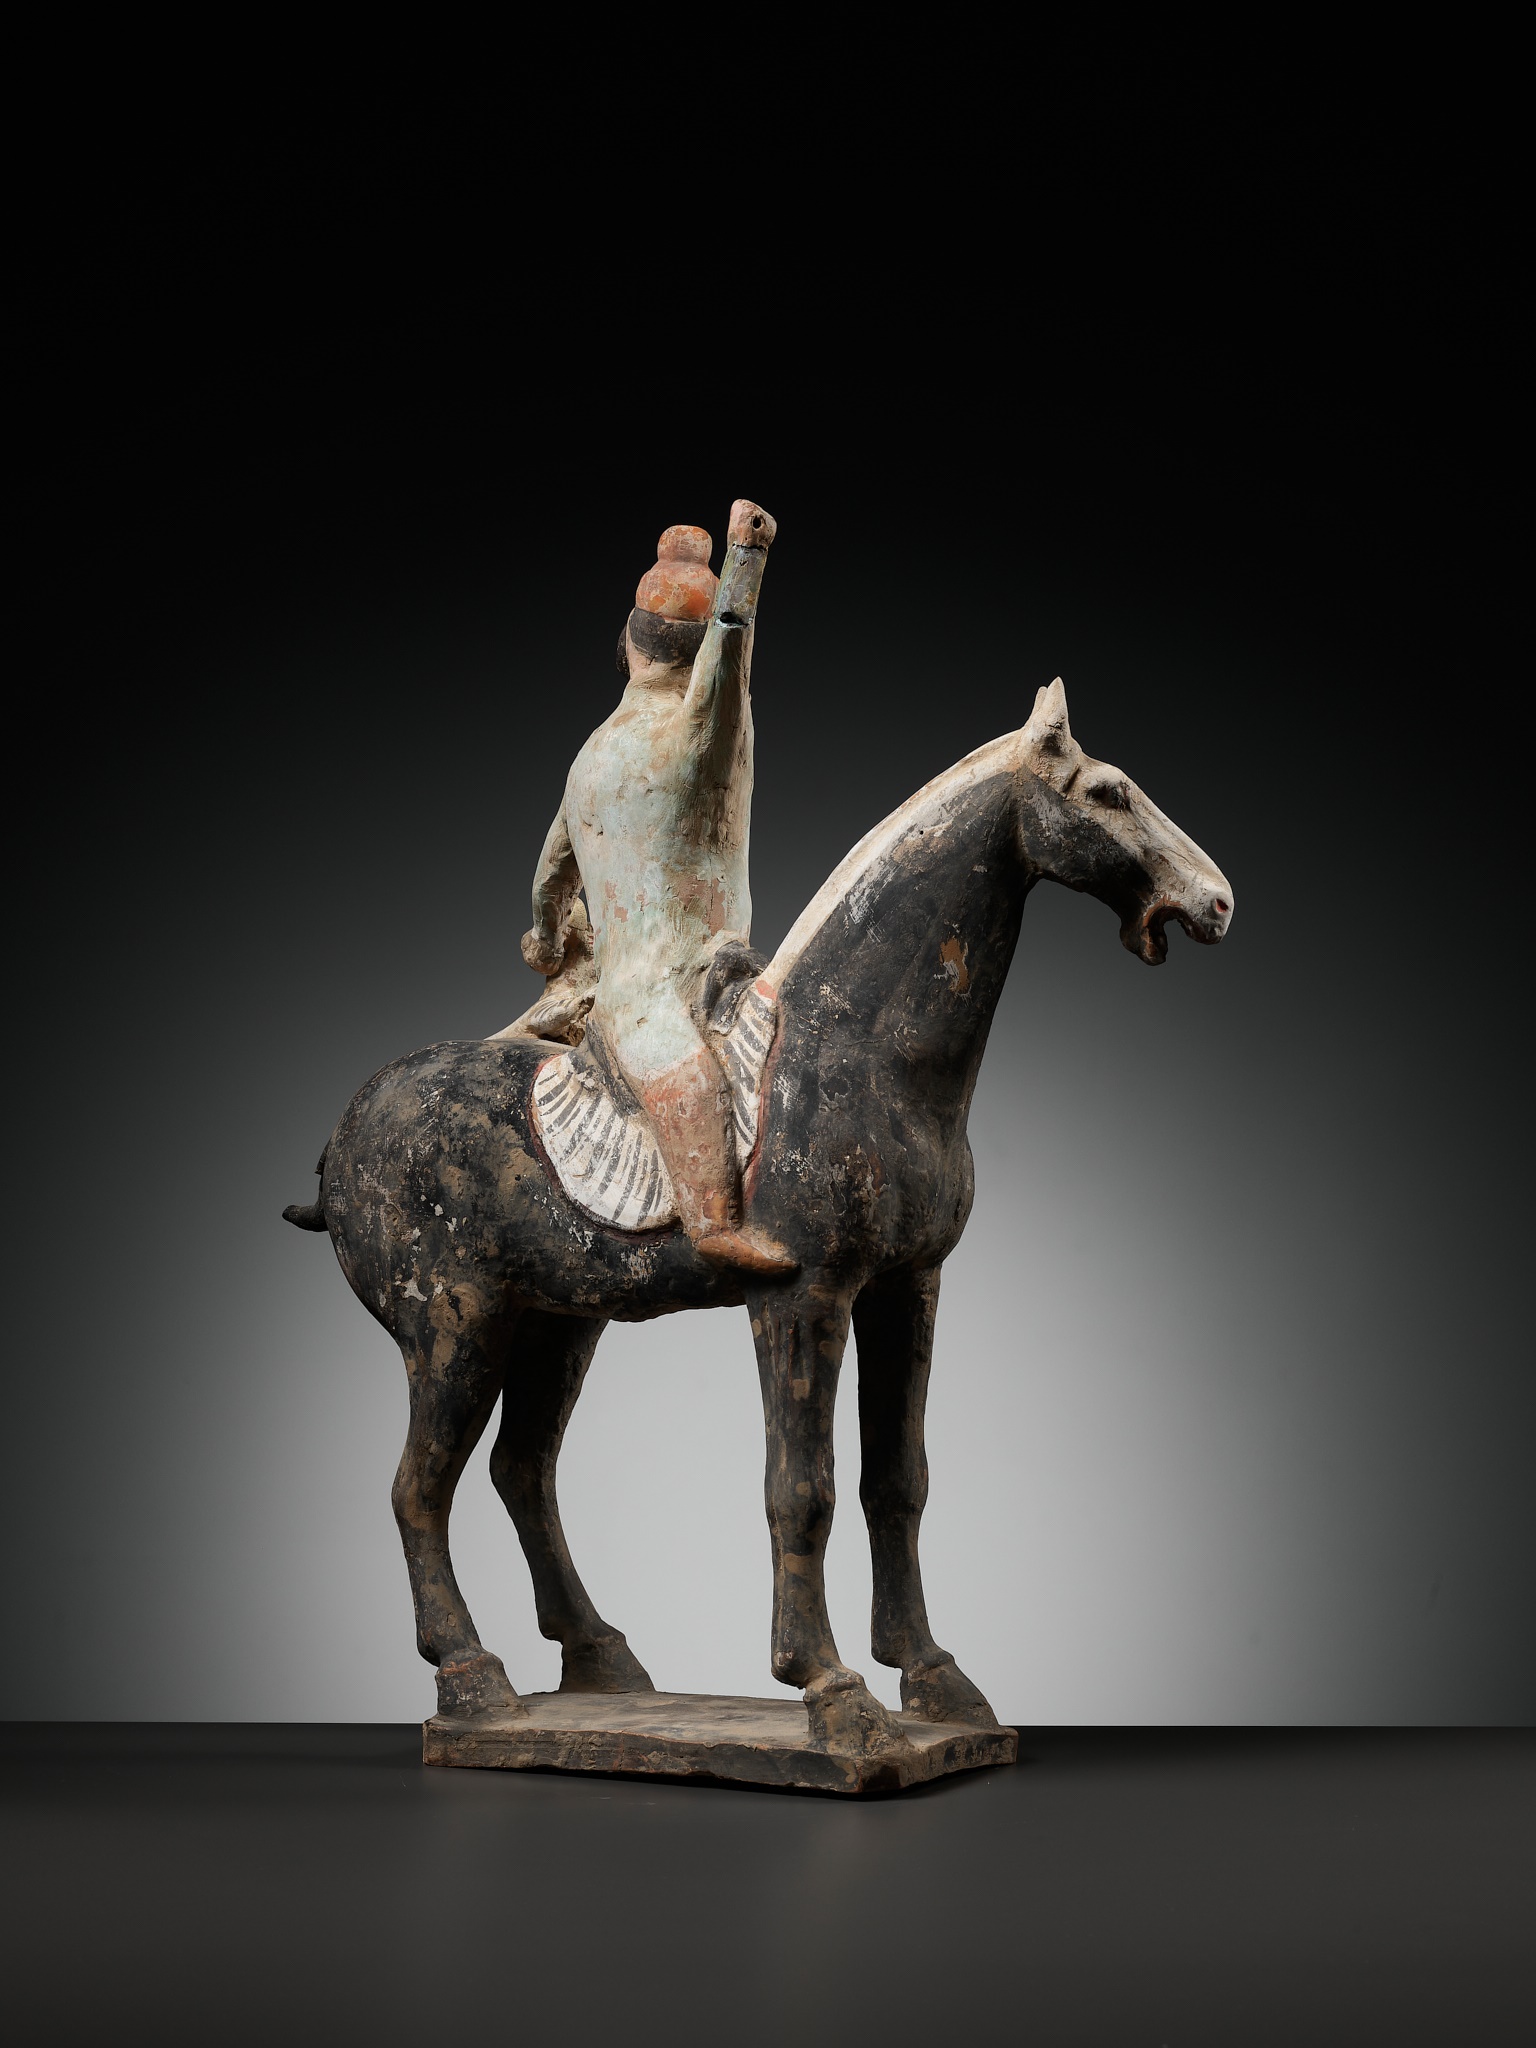 A RARE PAINTED POTTERY HORSE WITH A 'PHRYGIAN' RIDER AND TIGER CUB, TANG DYNASTY - Image 10 of 14